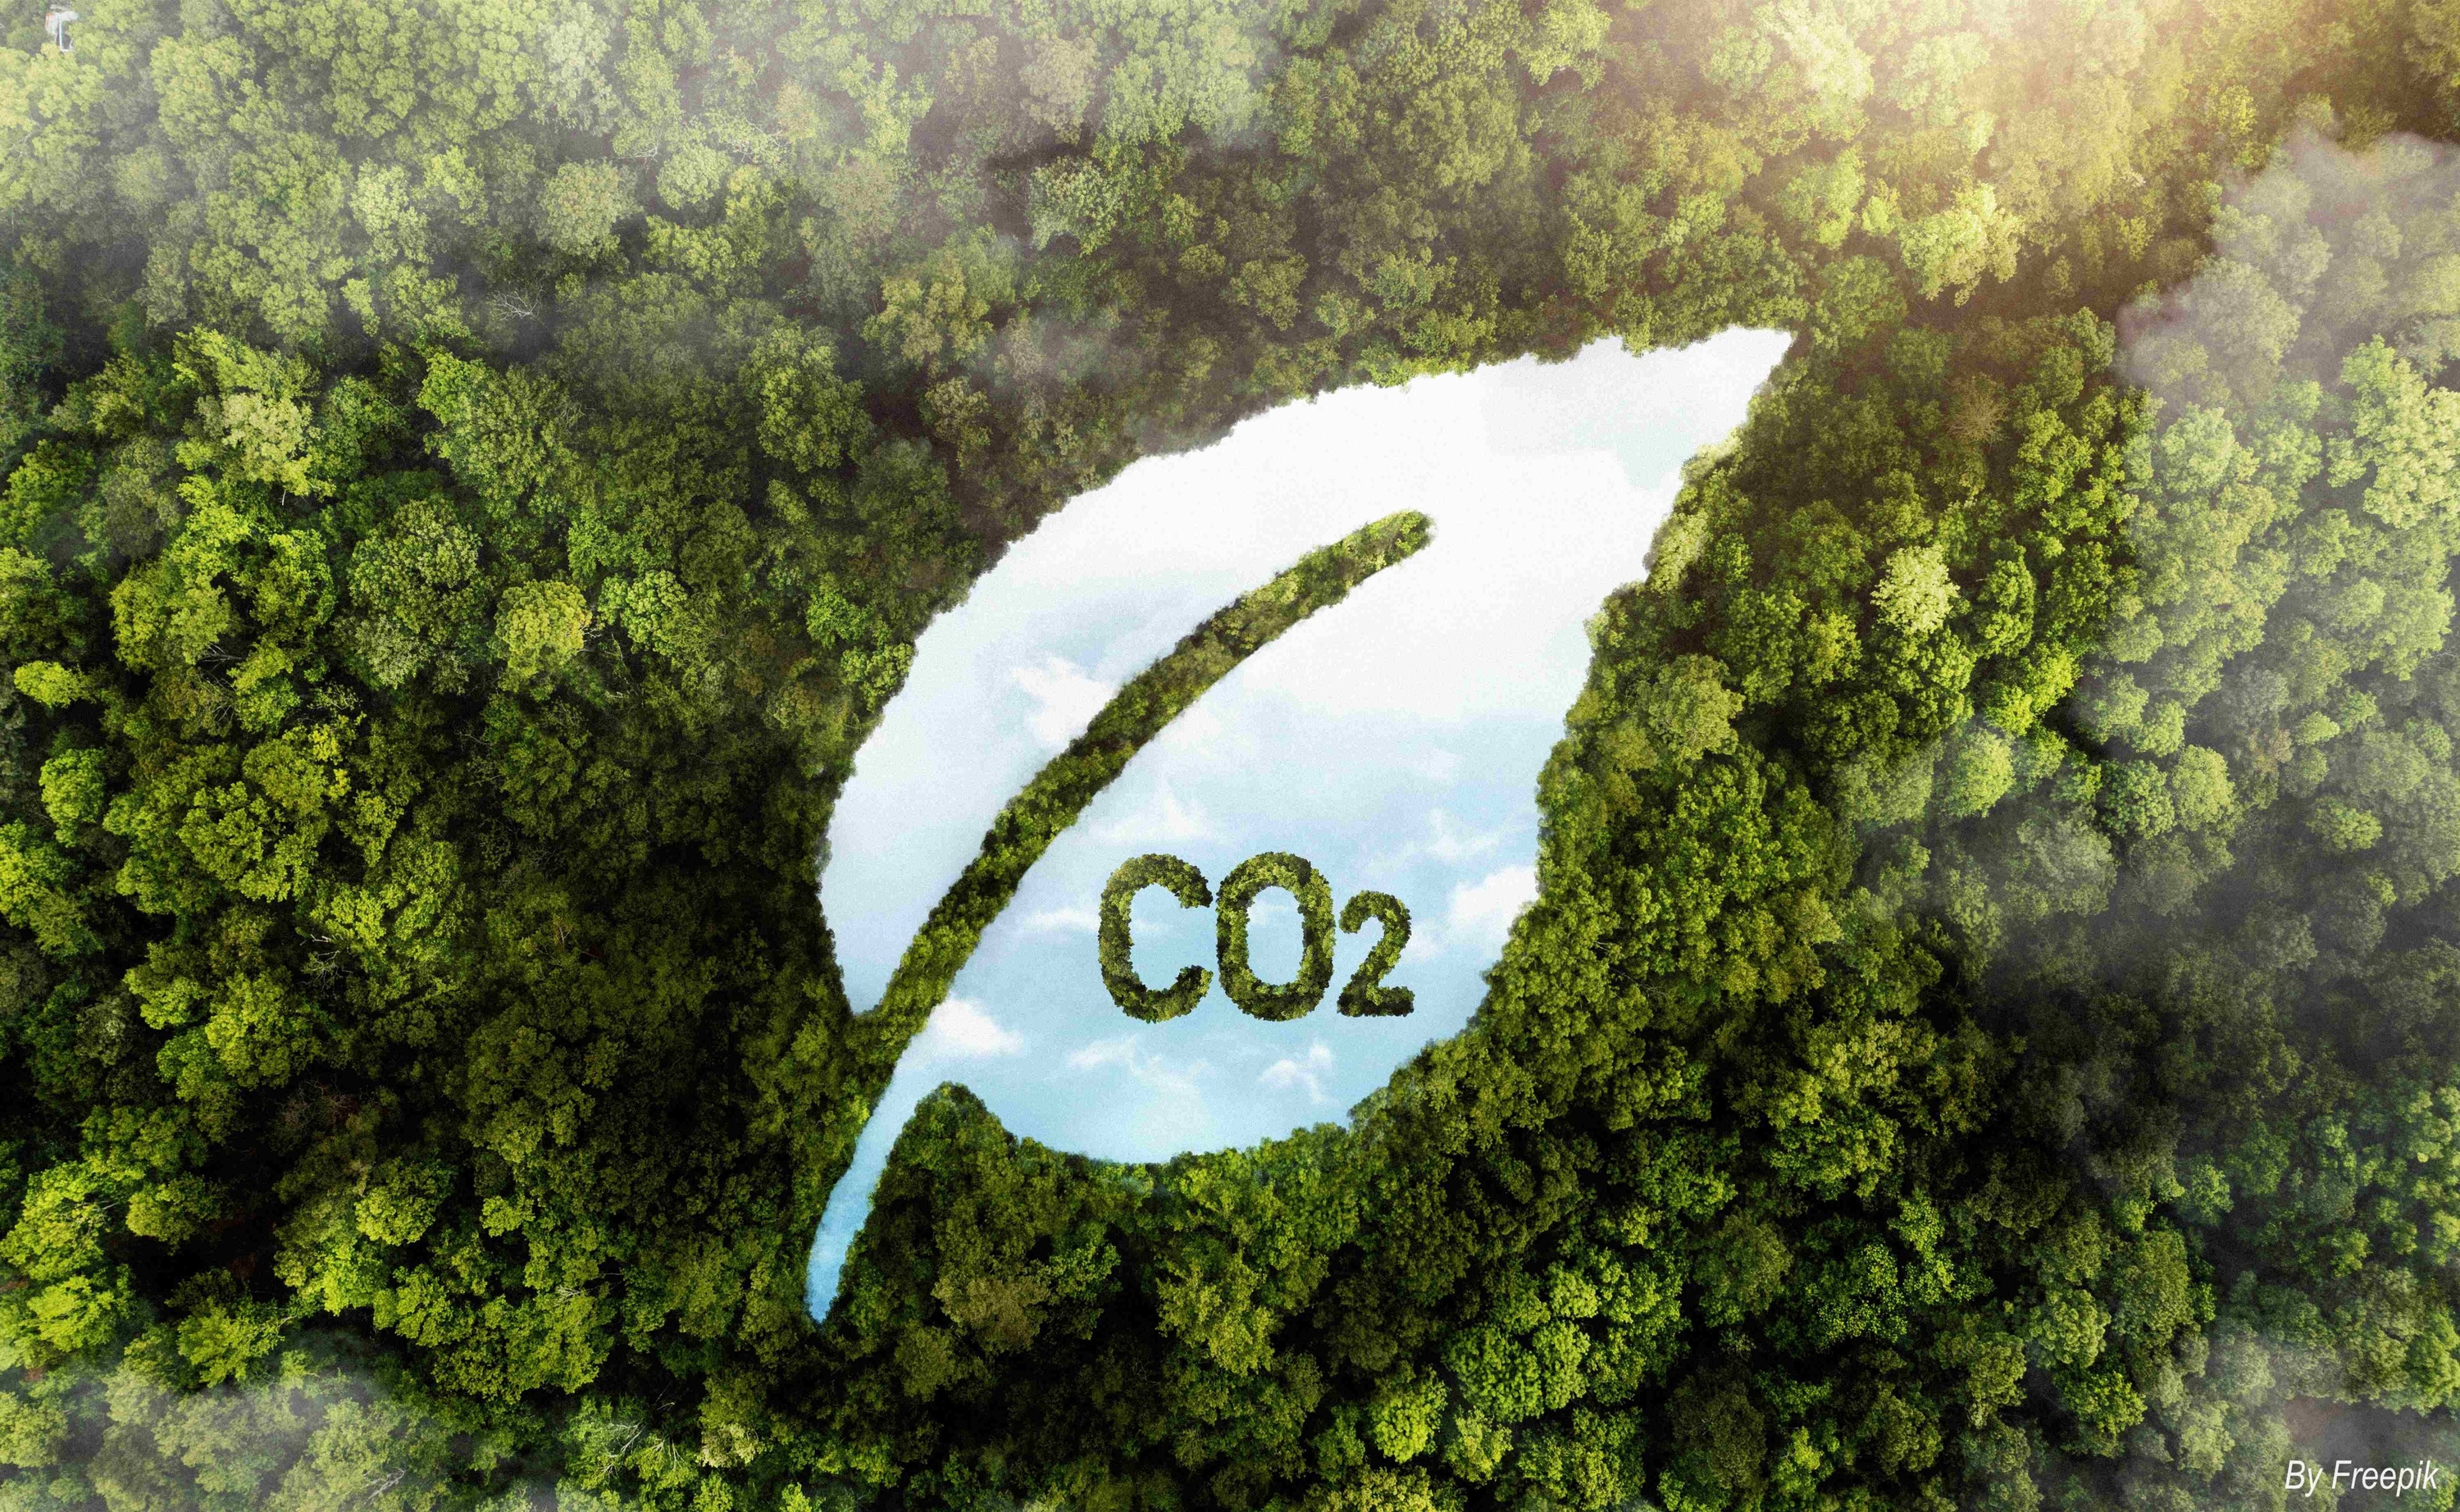 Reduce your CO2 emissions by travelling in a sustainable way